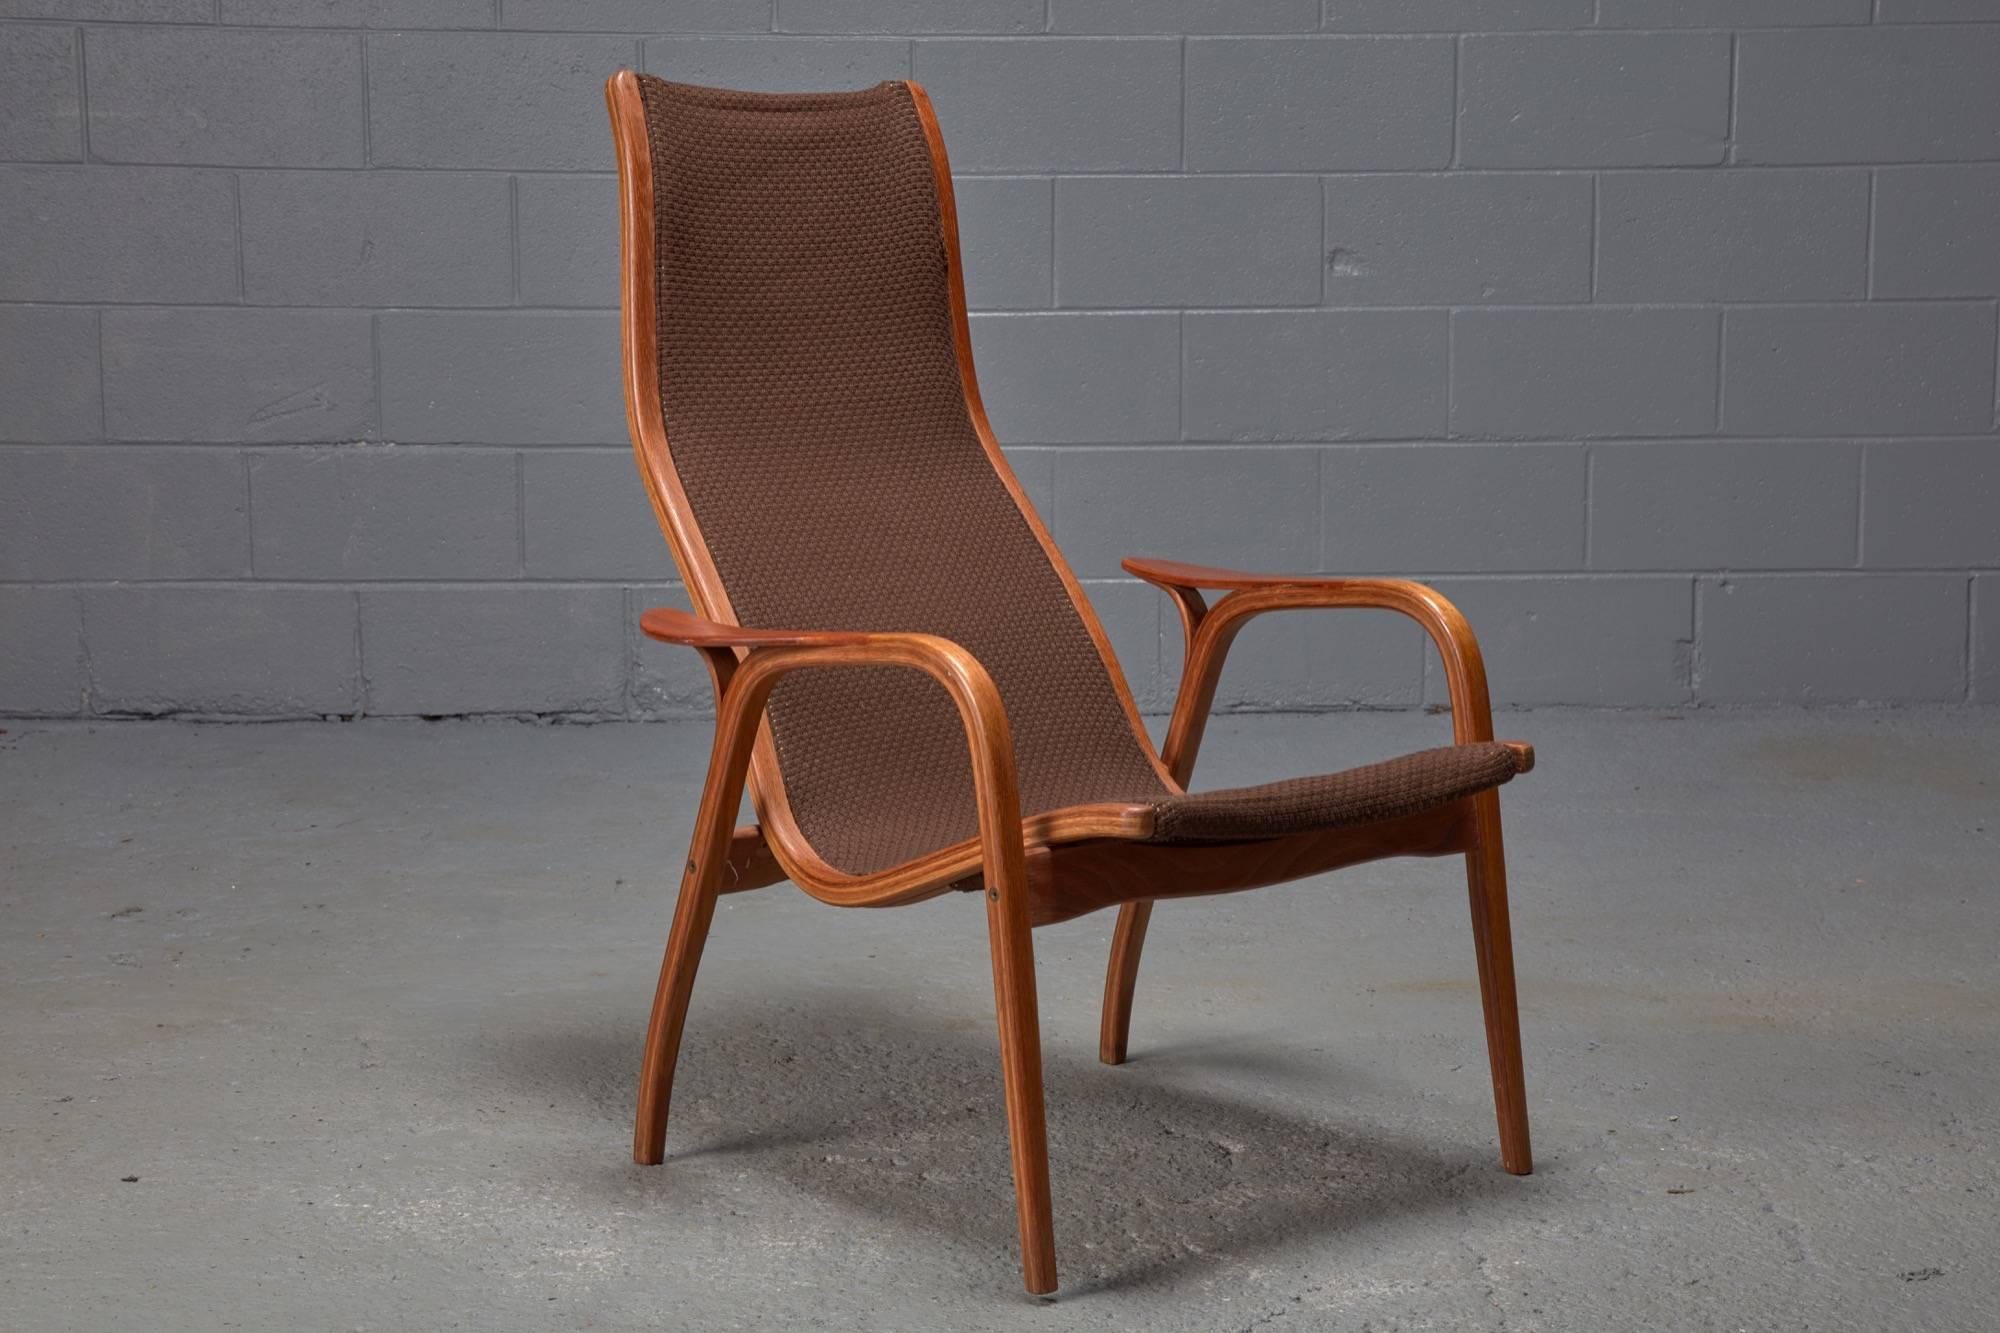 In the 1960s, Yngve Ekstrom designed the Lamino lounge chair for Swedese. The seat and back of the chair was designed to provide the greatest level of comfort to those who sit in it. The chairs feature oak and teak wood and their original textile.